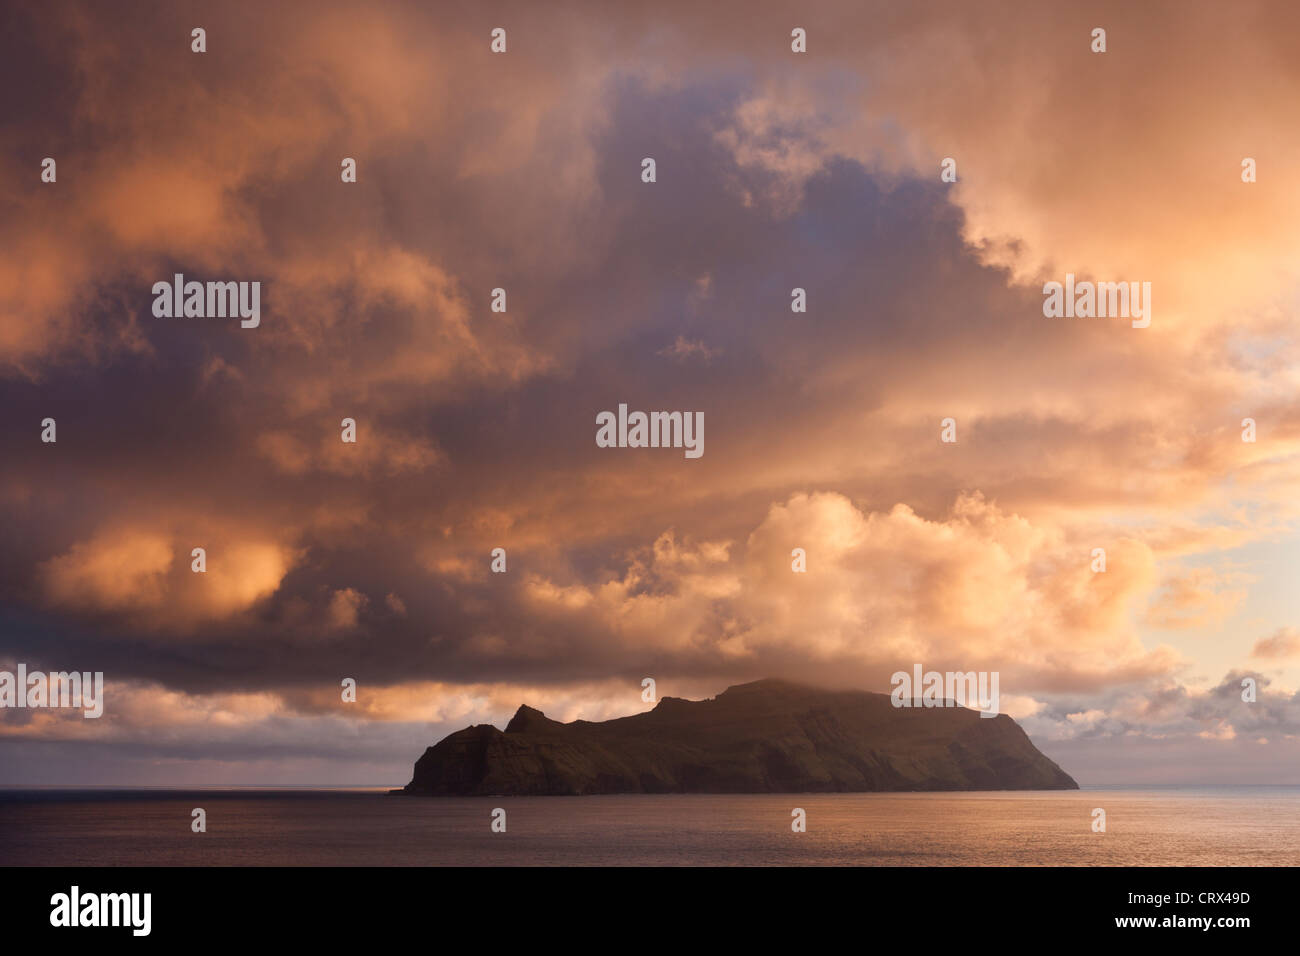 Spectacular sunset skies above the island of Mykines, Faroe Islands. Spring (May) 2012. Stock Photo